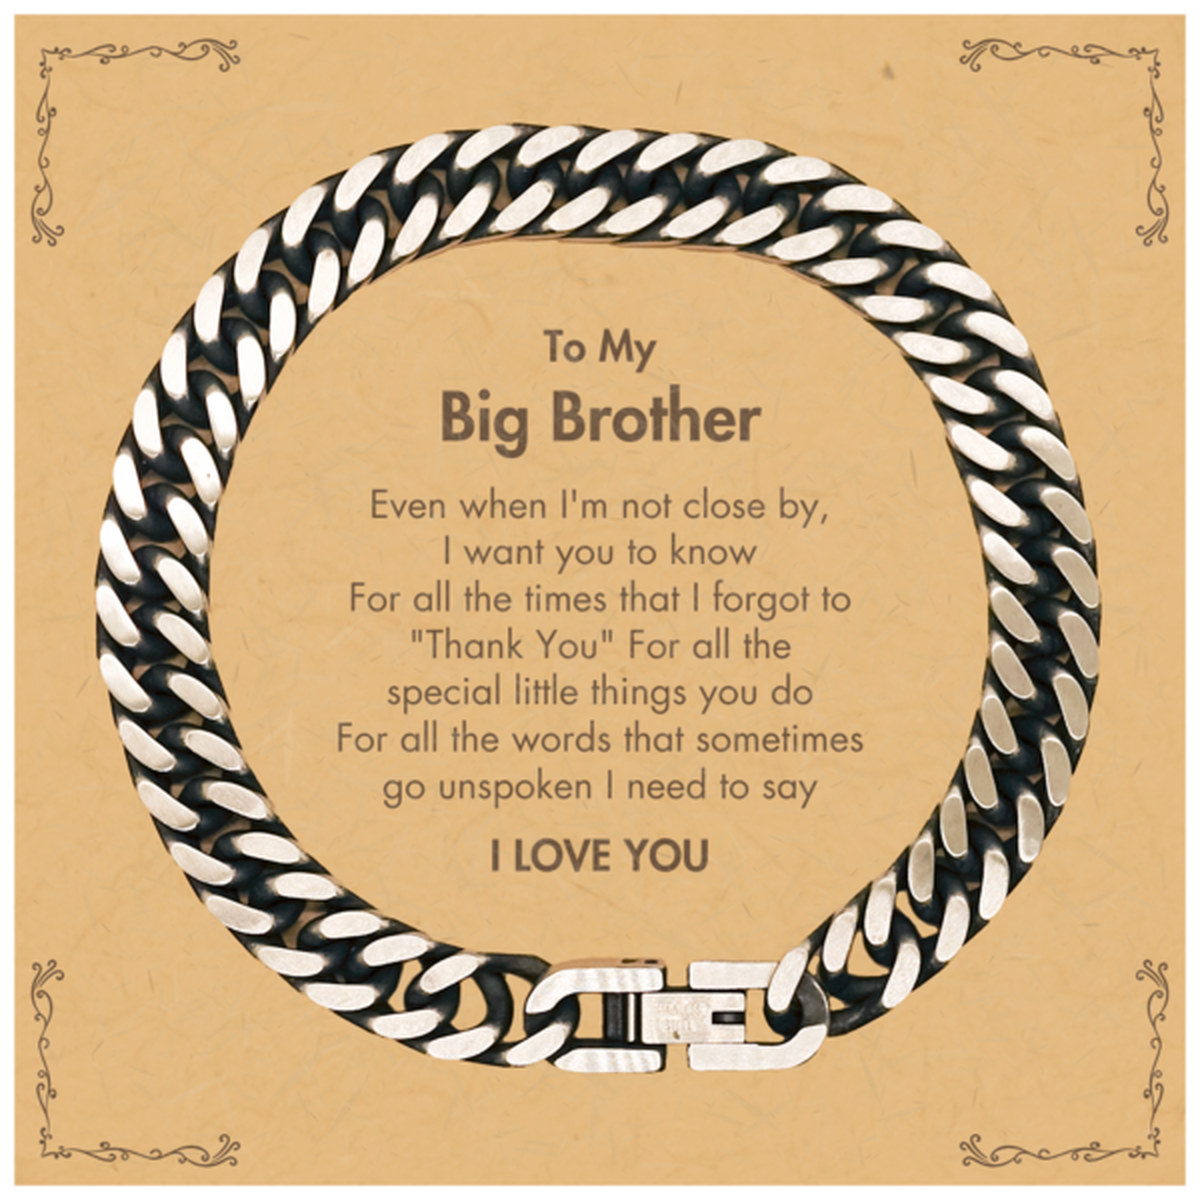 Thank You Gifts for Big Brother, Keepsake Cuban Link Chain Bracelet Gifts for Big Brother Birthday Mother's day Father's Day Big Brother For all the words That sometimes go unspoken I need to say I LOVE YOU